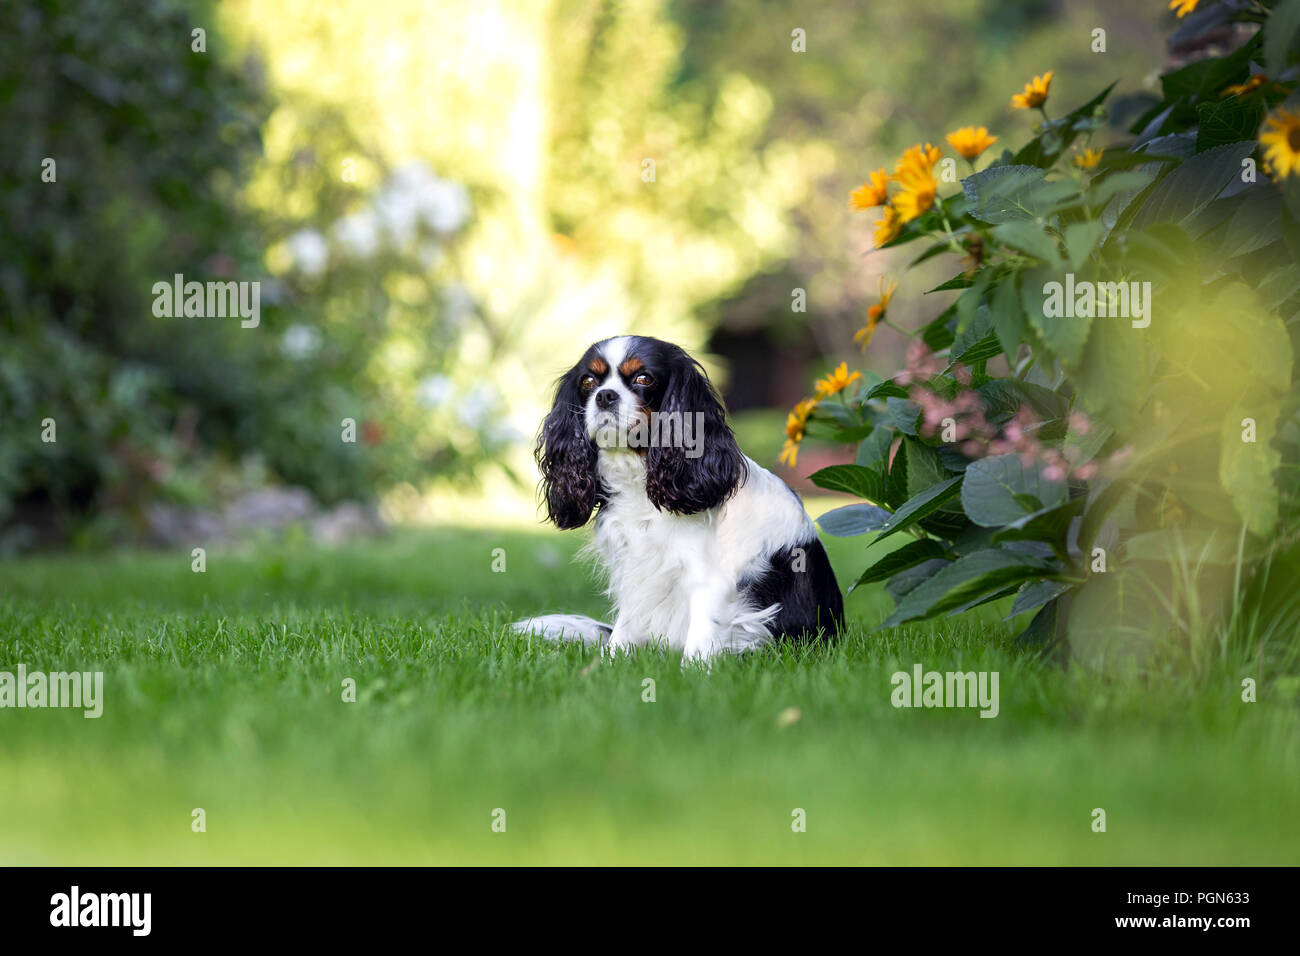 Cute dog sitting on the grass in the garden Stock Photo